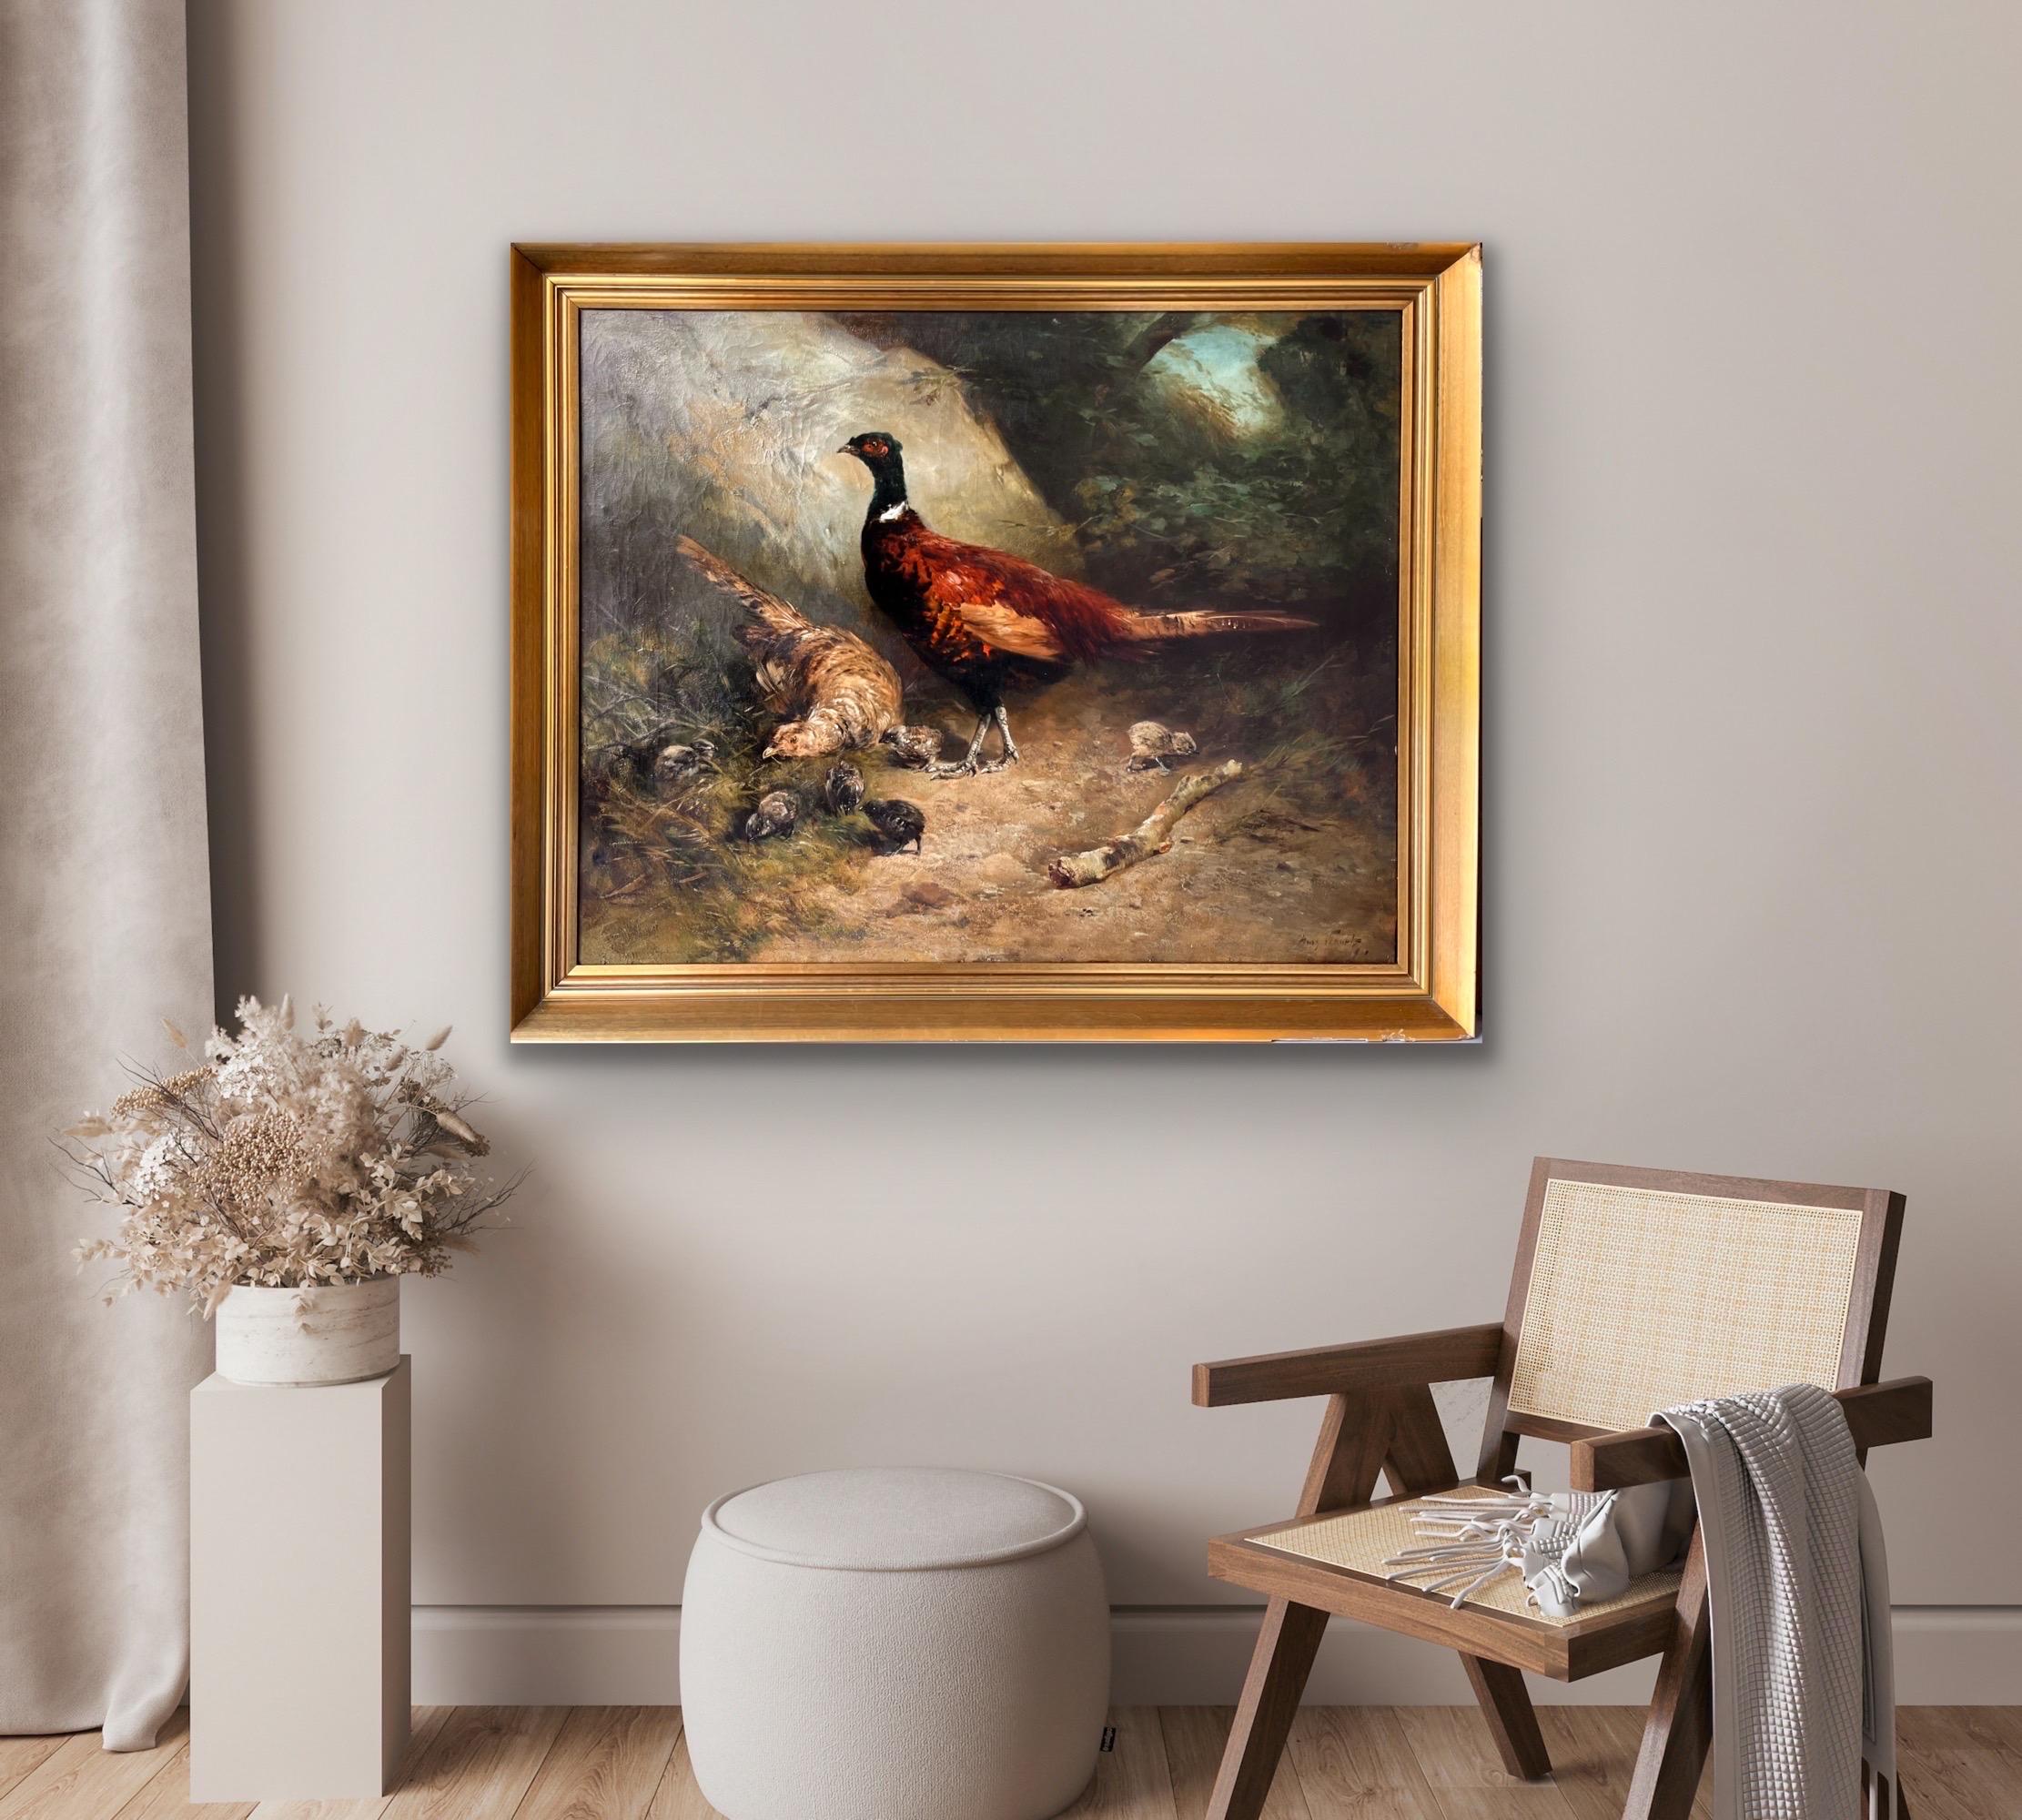 Huge 19th century romantic painting Pheasant with their chicks in a forest - Painting by Henry Schouten